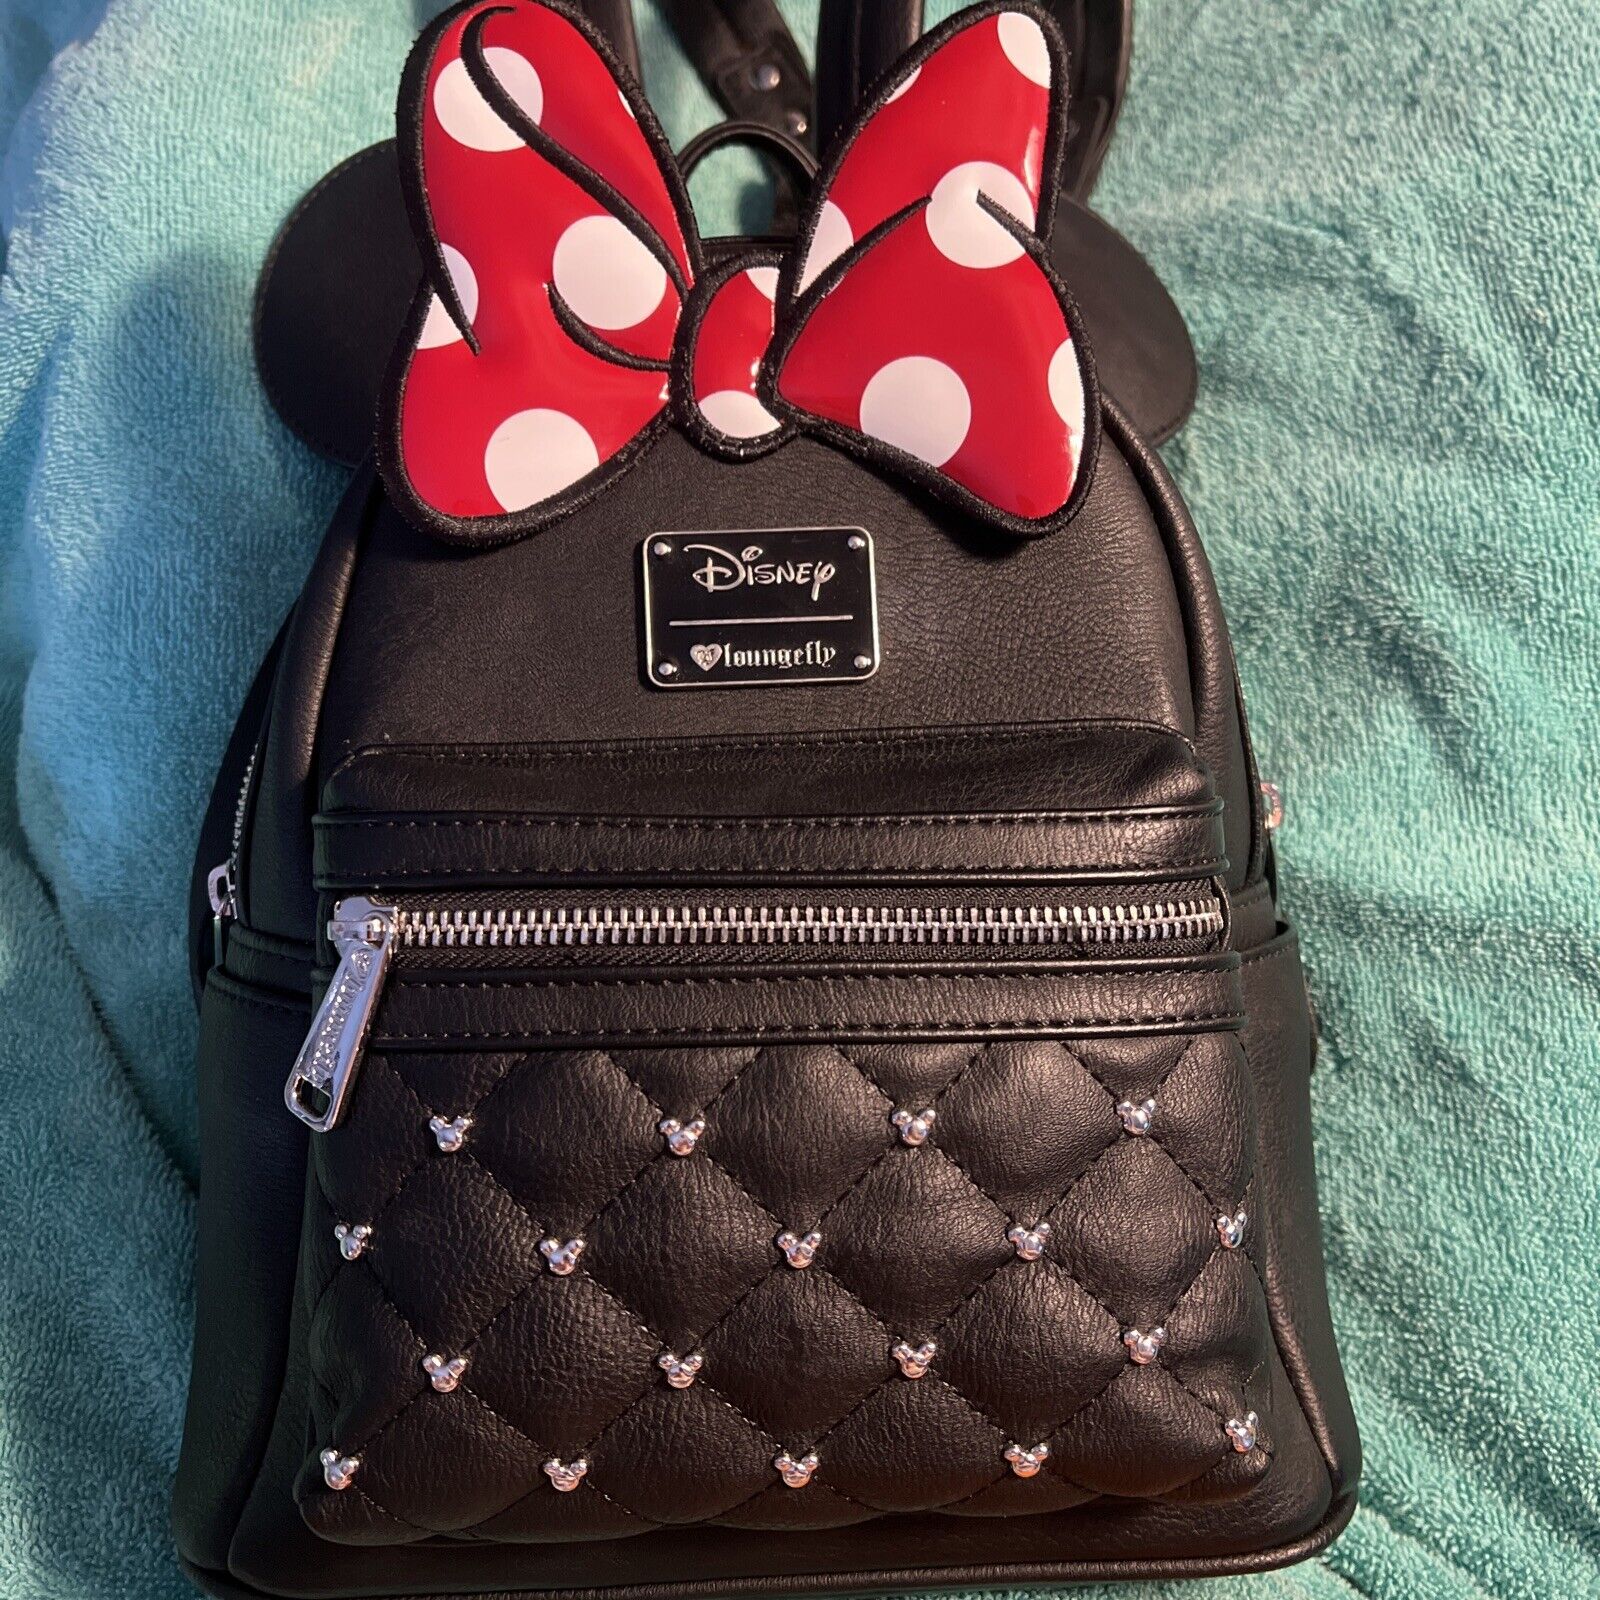 Vintage Disney Minnie Mouse Mini Backpack Loungefly 11” Tall X 9” Wide